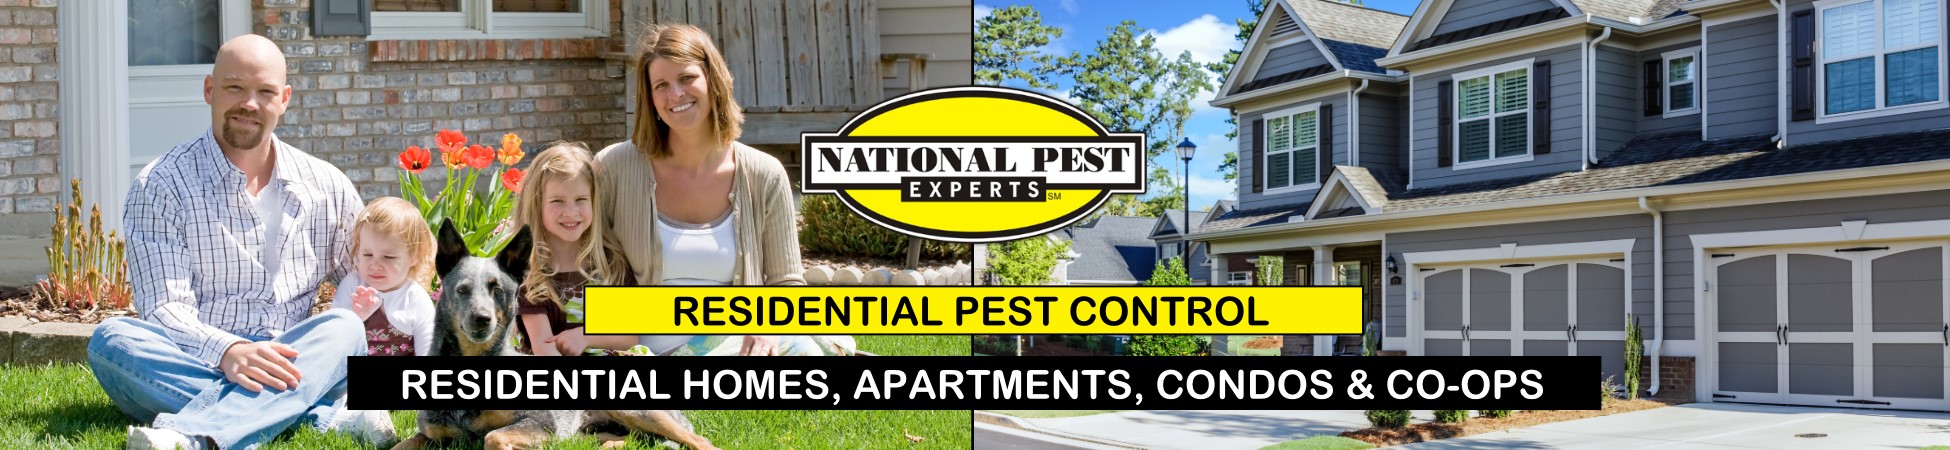 National Pest Experts - Residential exterminating and pest control in Commack, NY